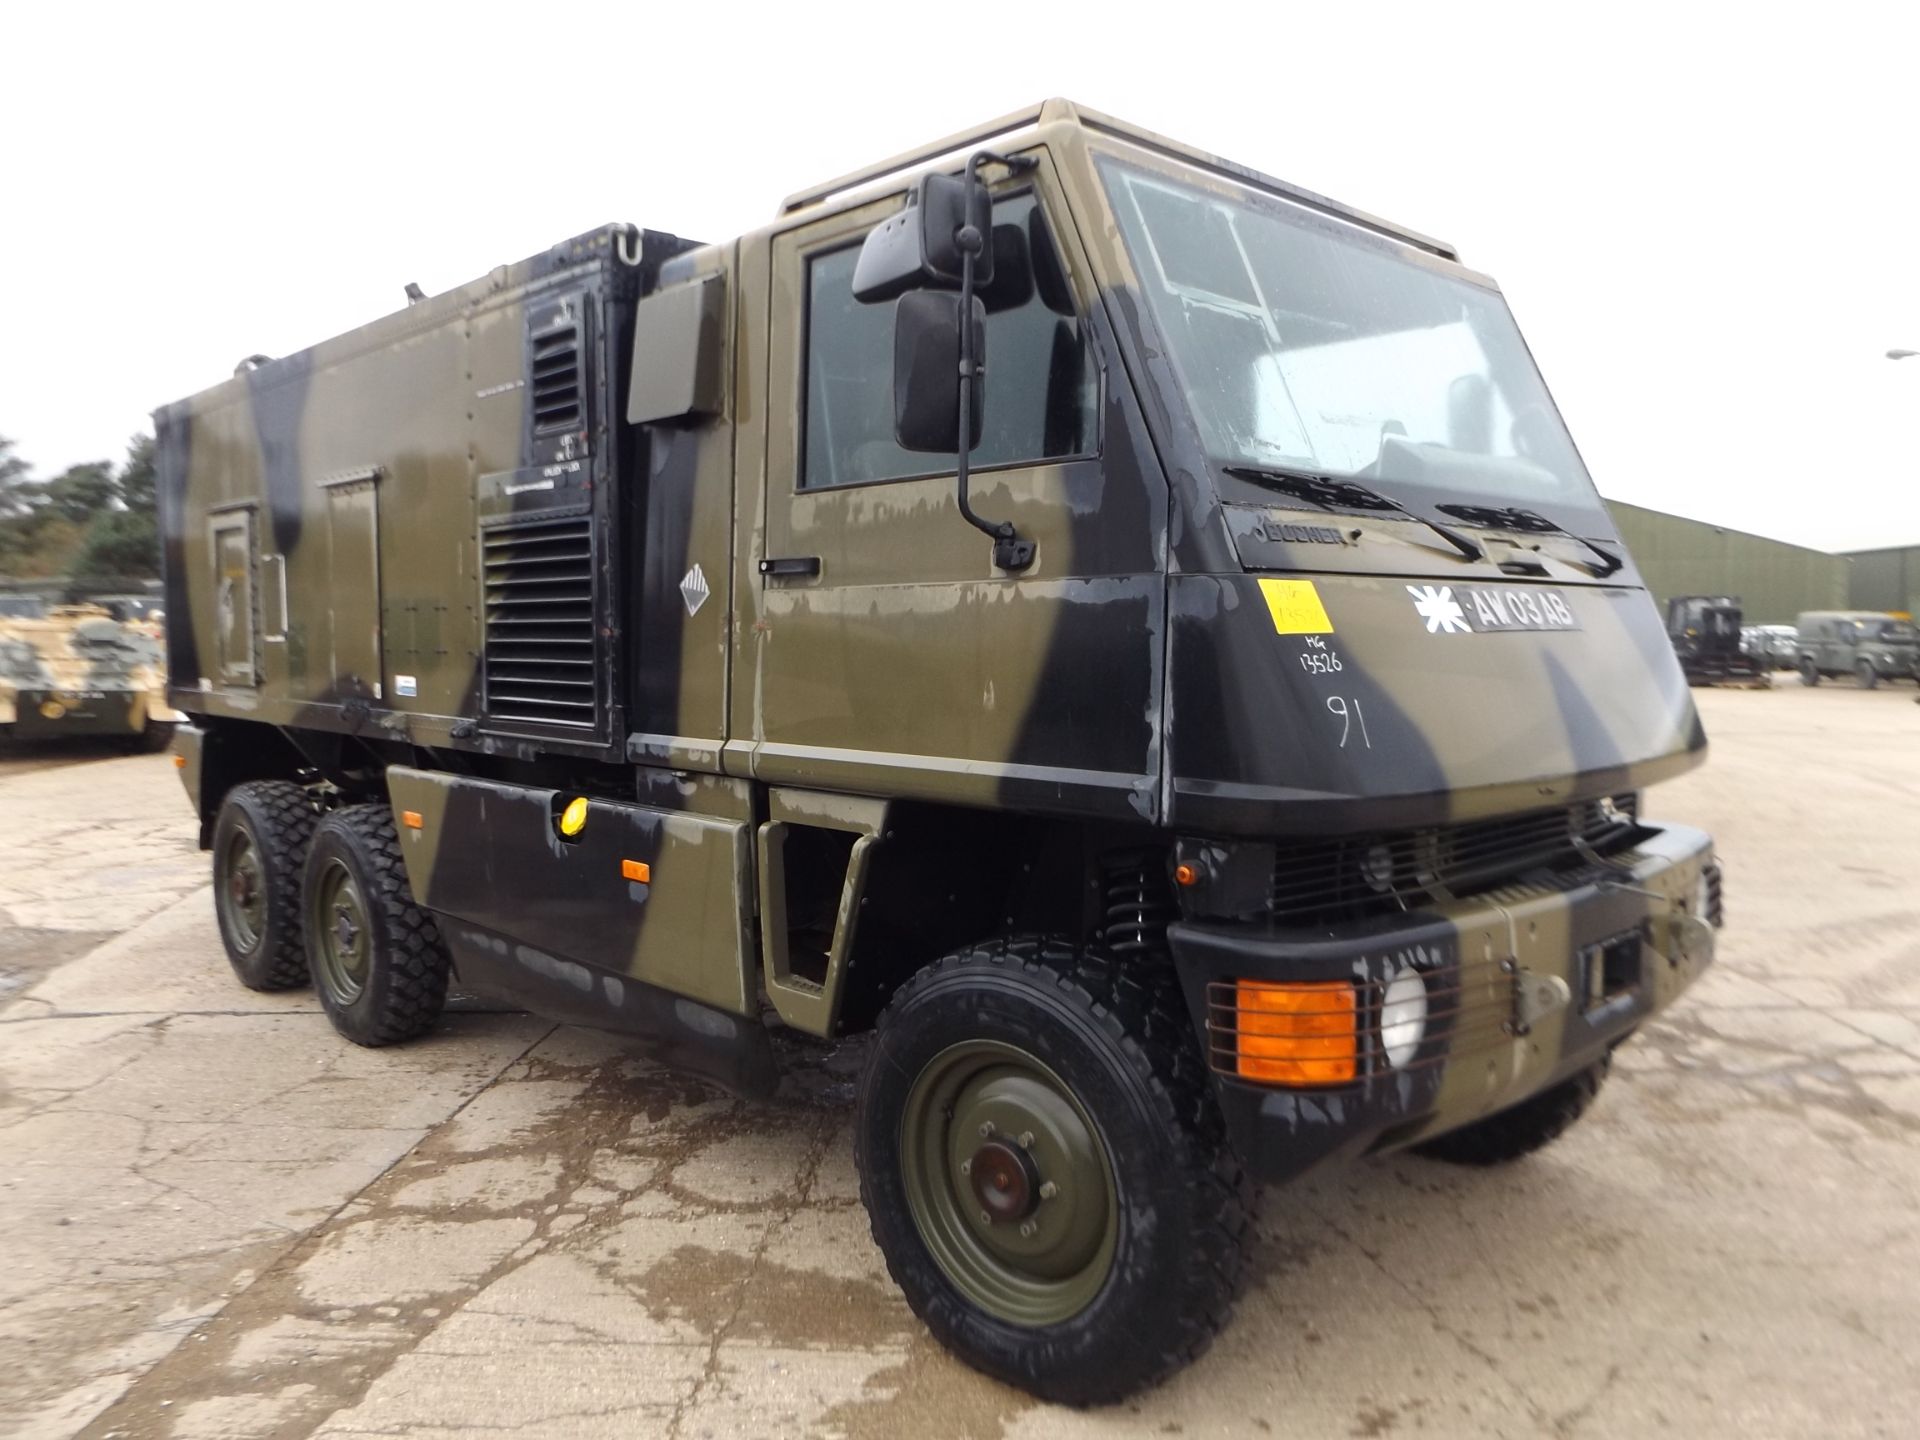 Ex Reserve Left Hand Drive Mowag Bucher Duro II 6x6 High-Mobility Tactical Vehicle - Image 3 of 20